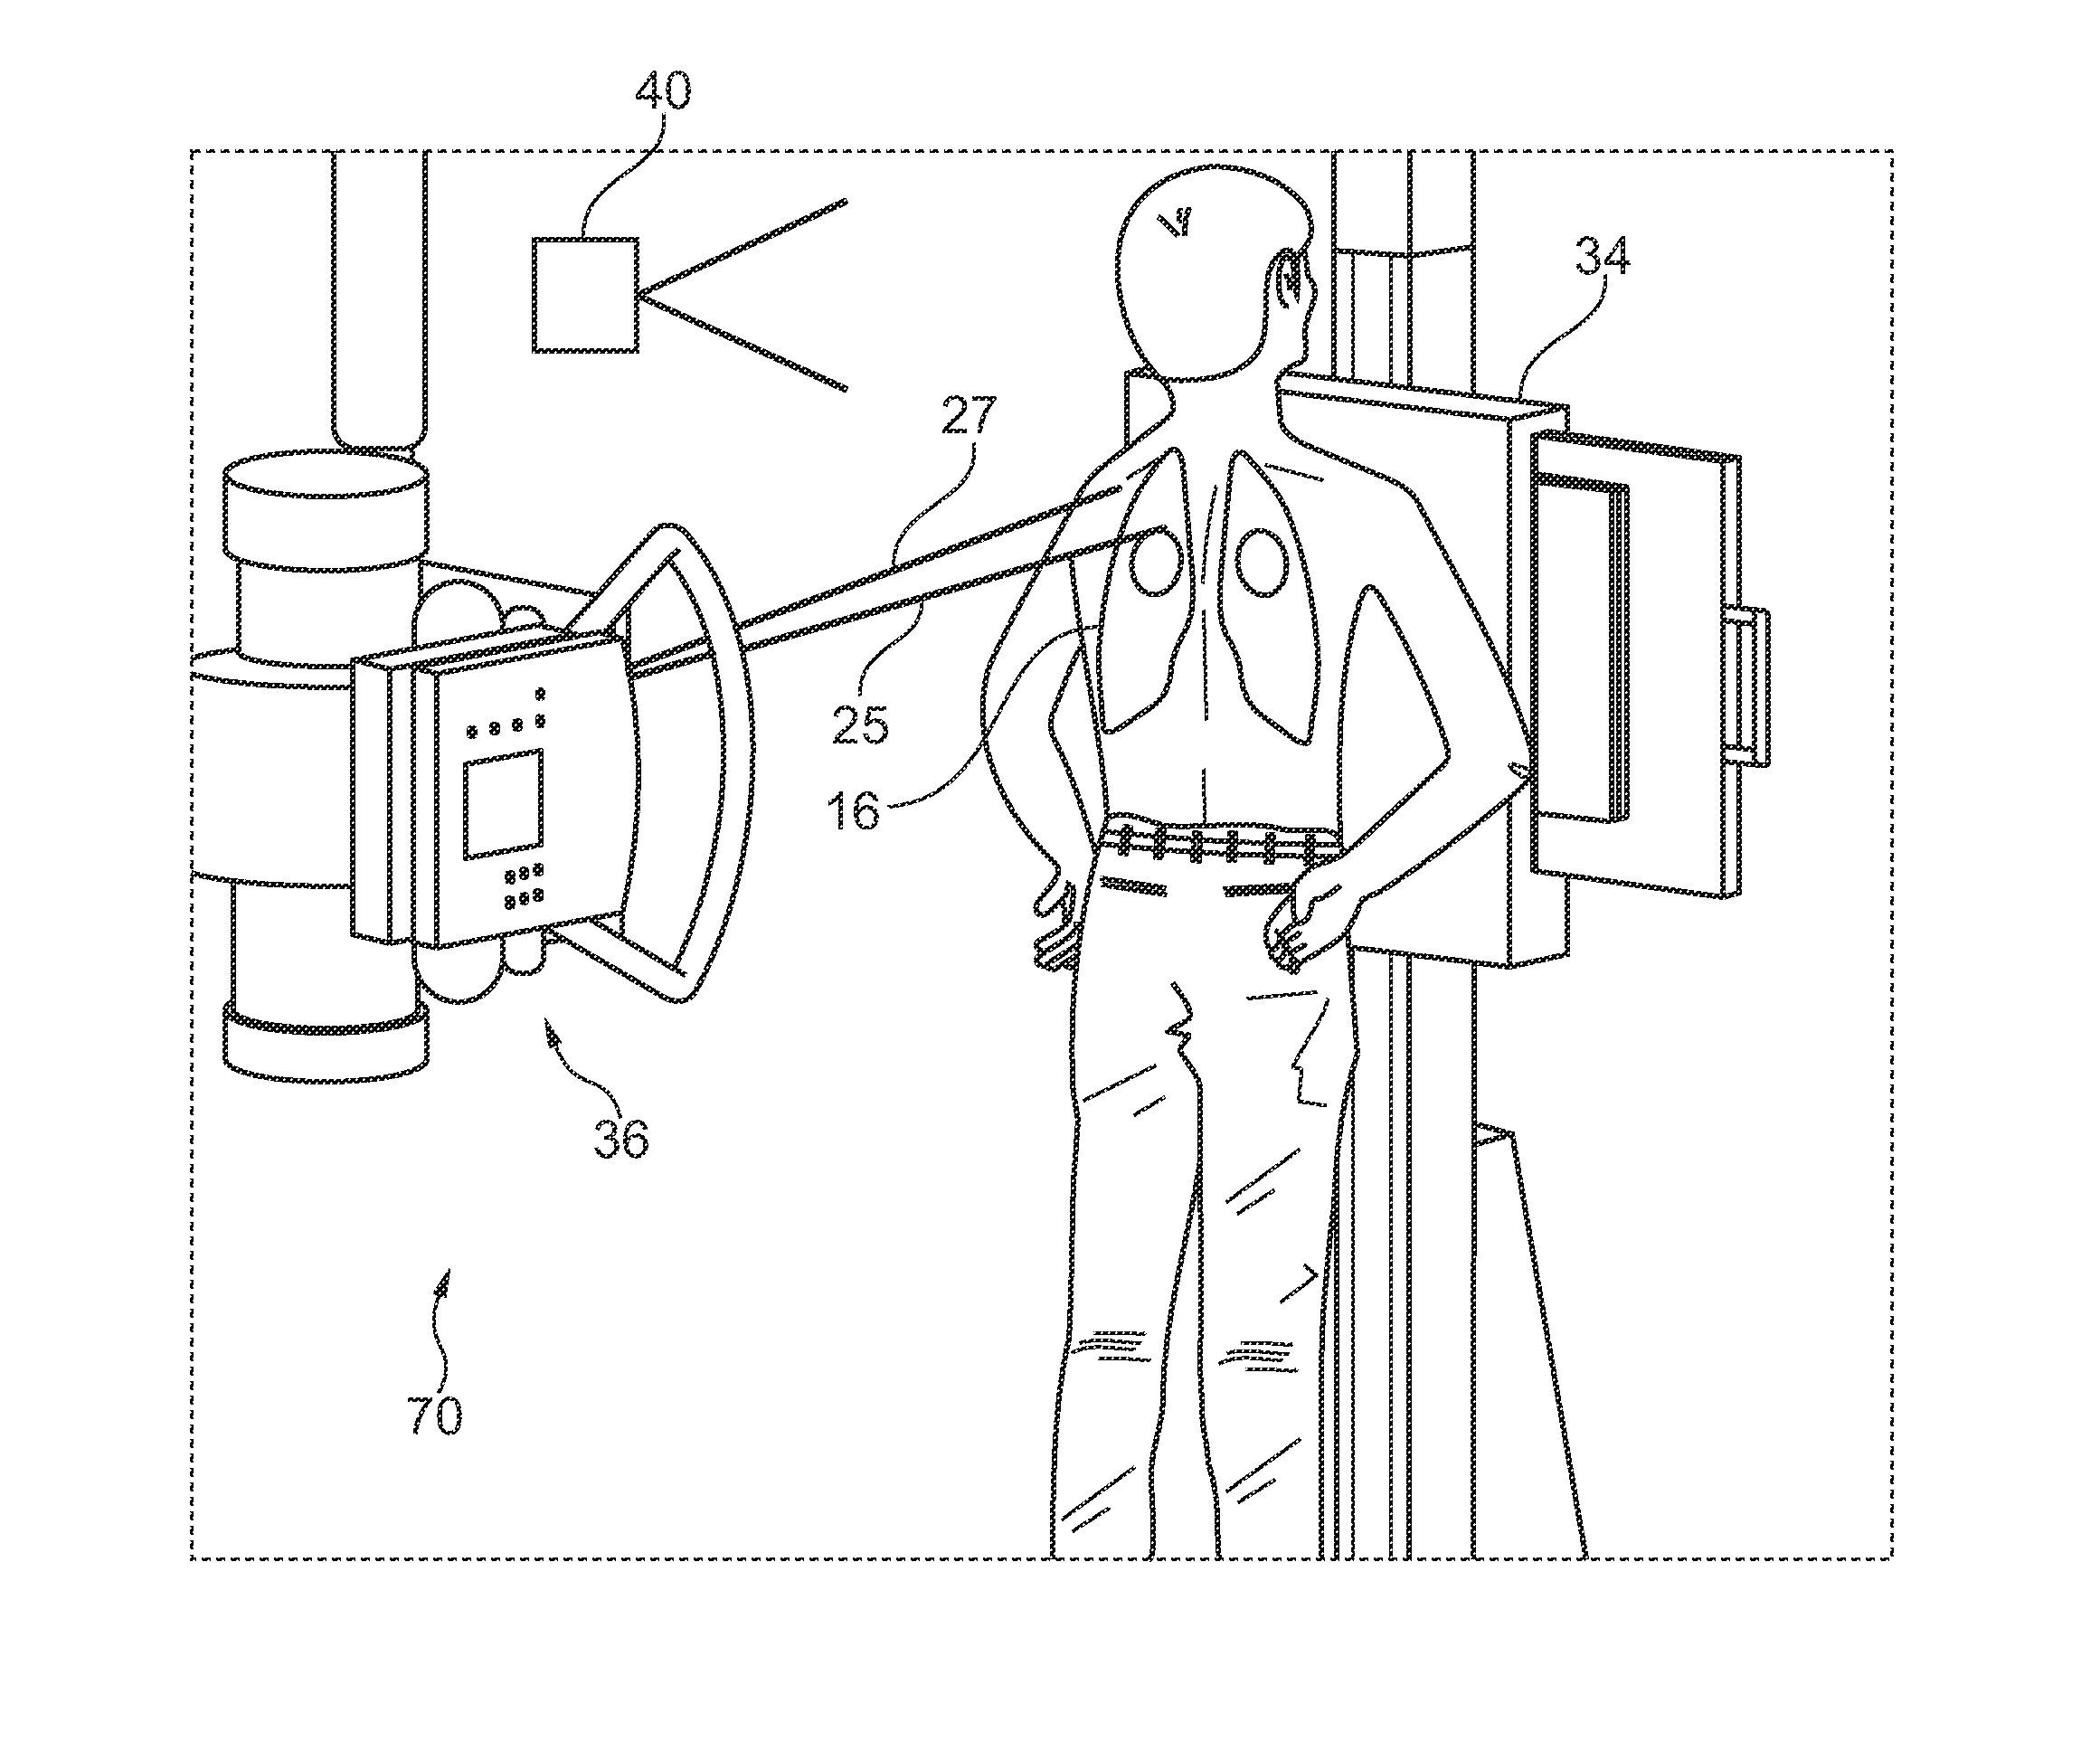 X-ray imaging guiding system for positioning a patient